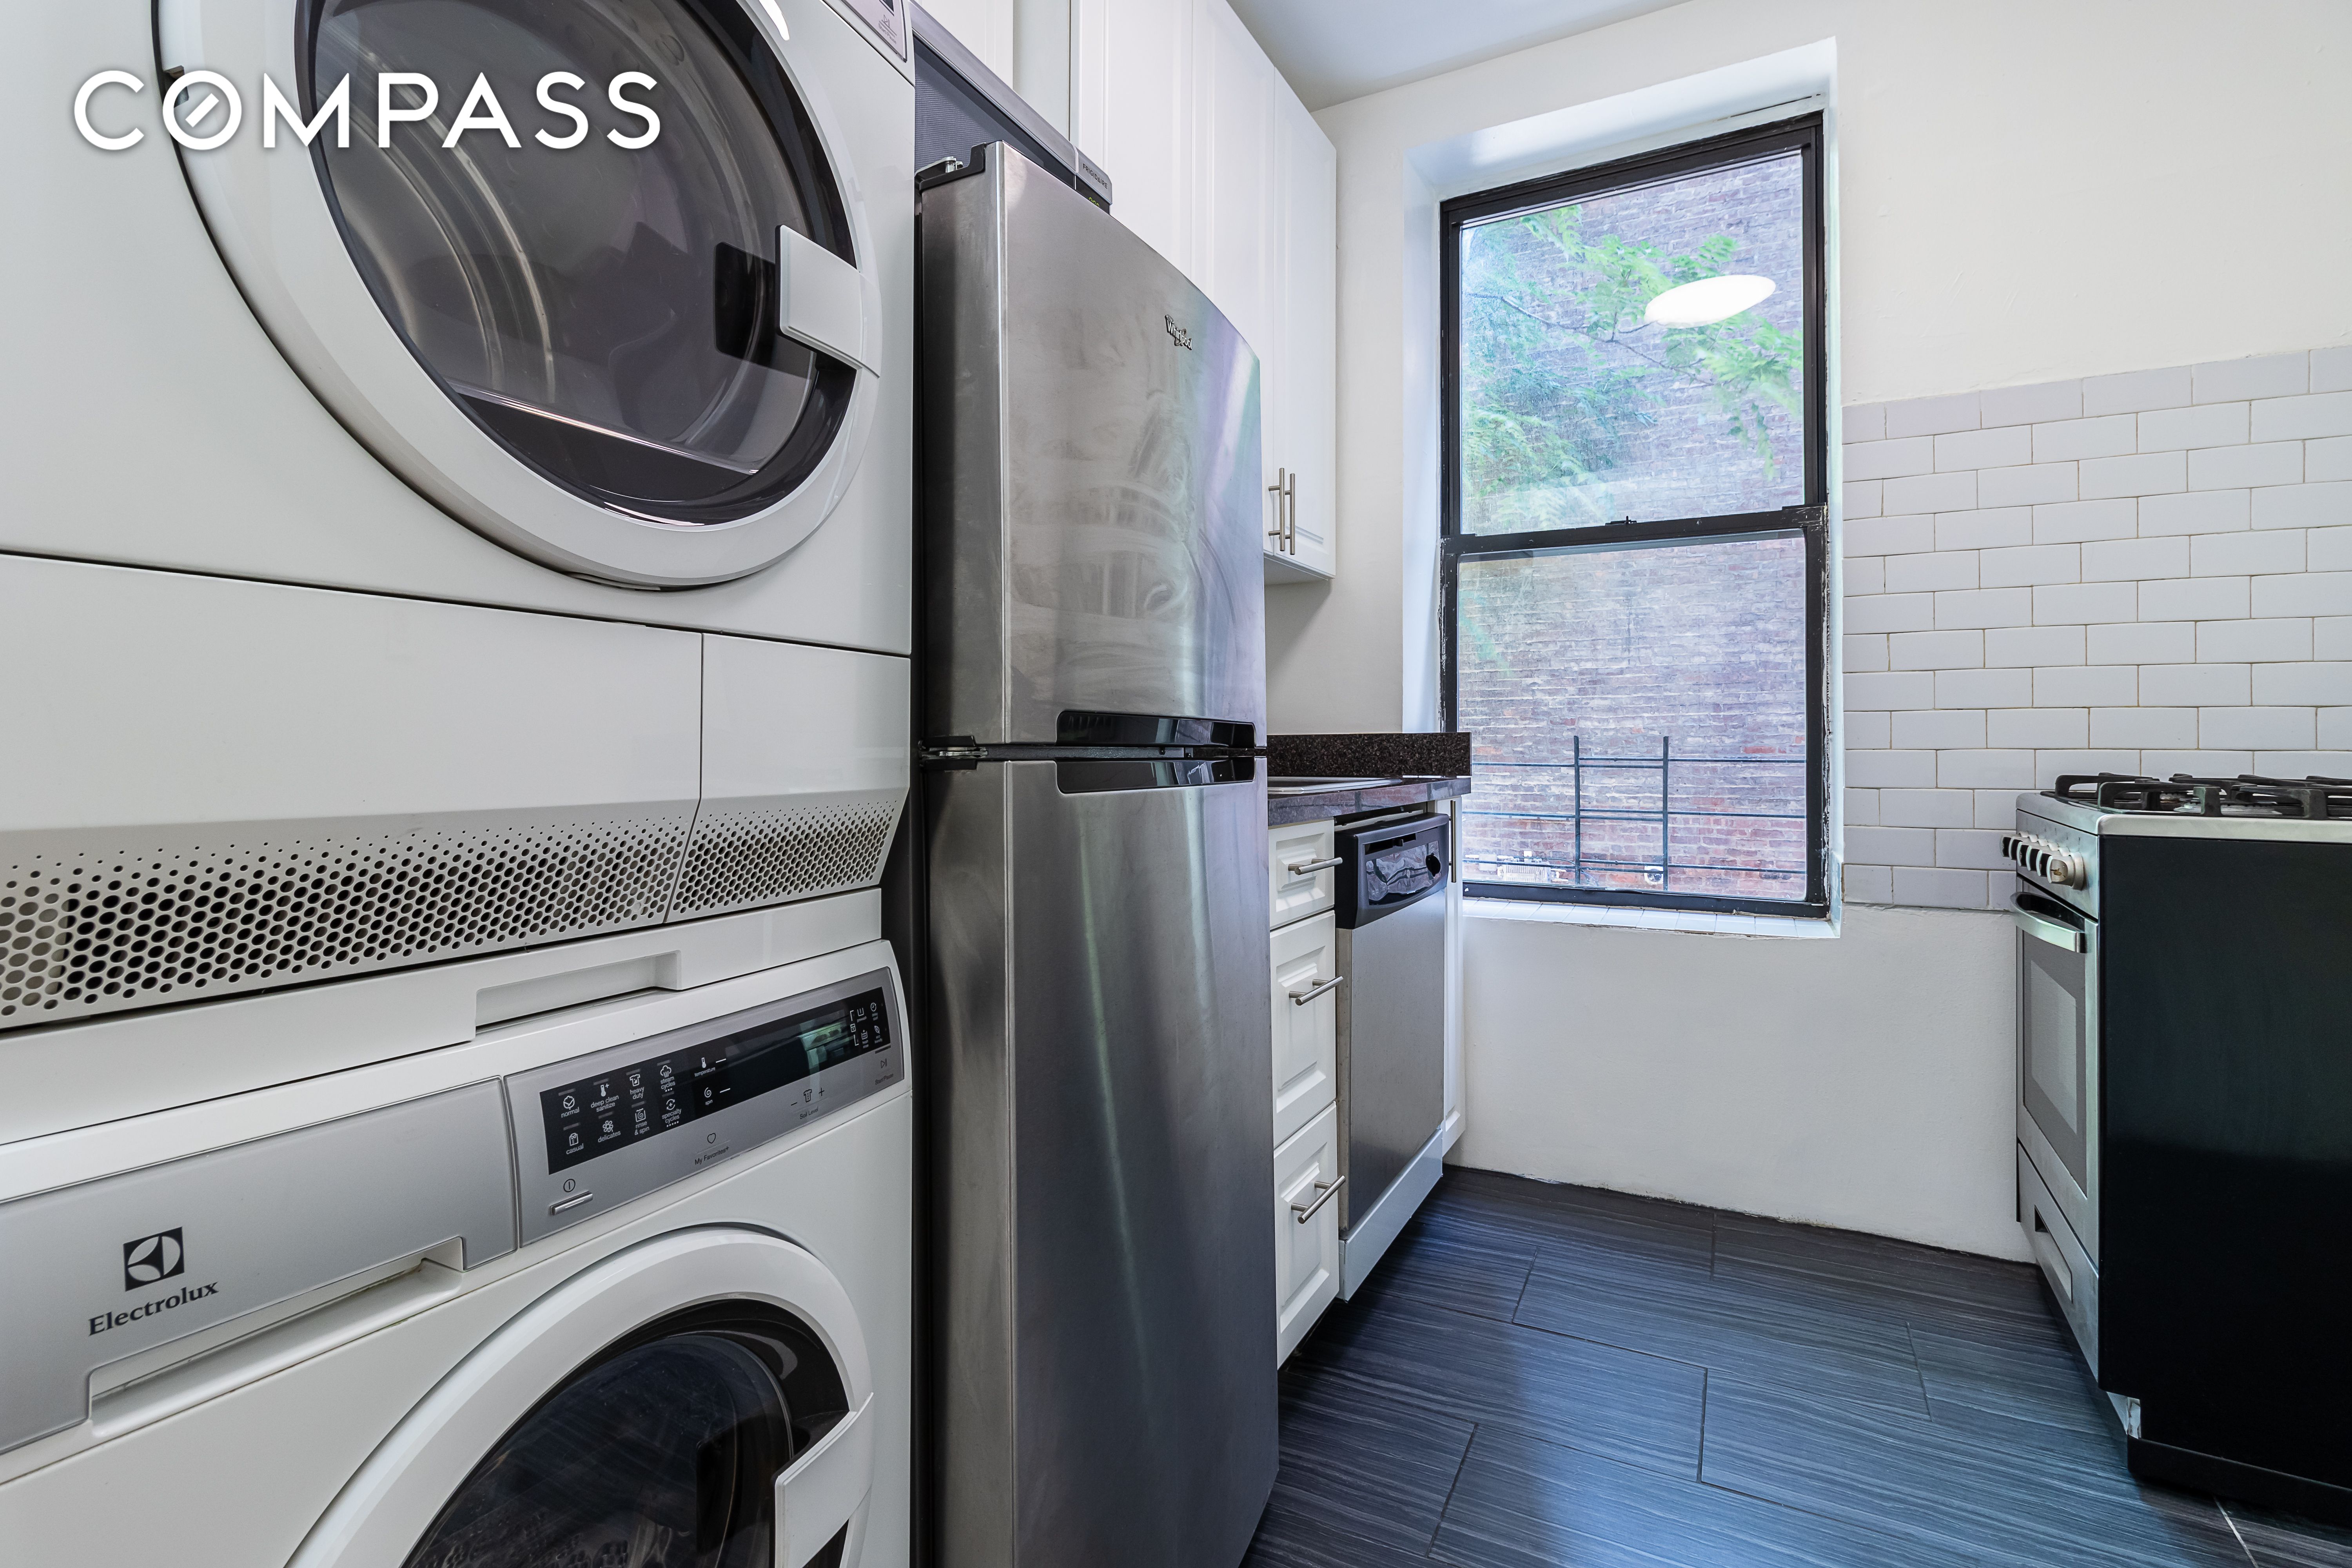 28 Macombs Place 4, Central Harlem, Upper Manhattan, NYC - 1 Bedrooms  
1 Bathrooms  
4 Rooms - 